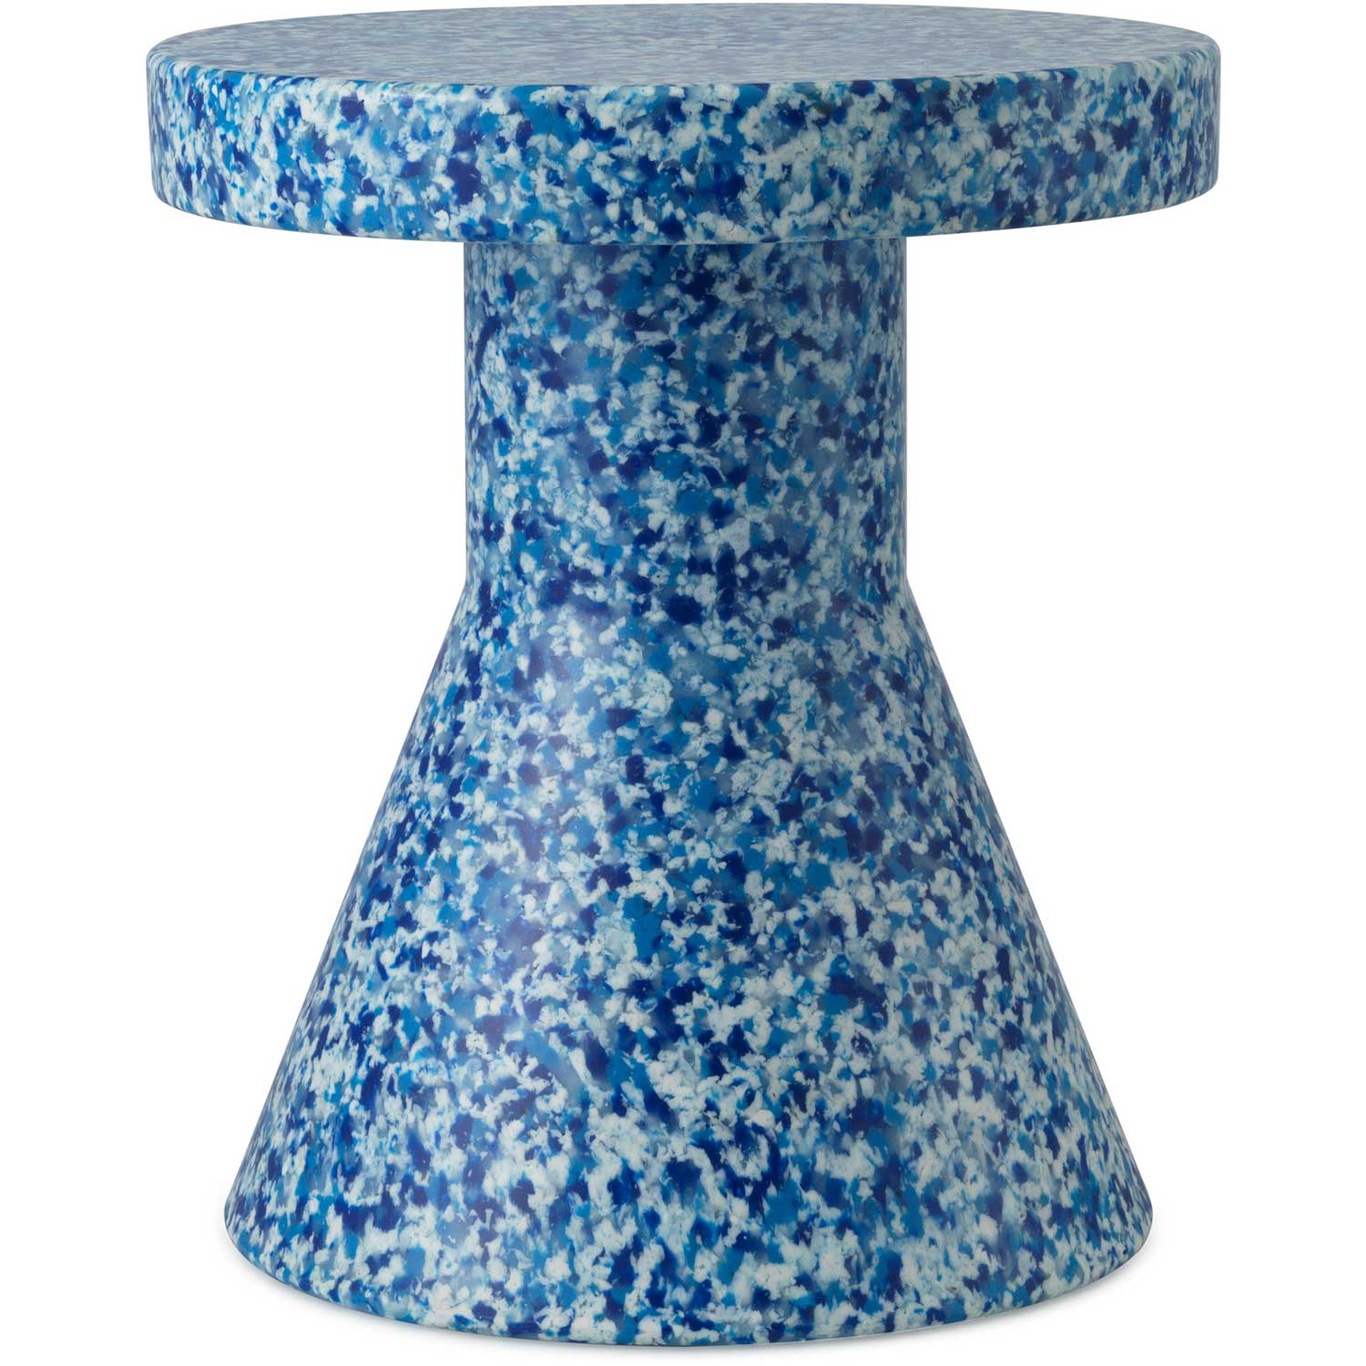 Bit Stool / Side Table, Cone-shaped, Blue